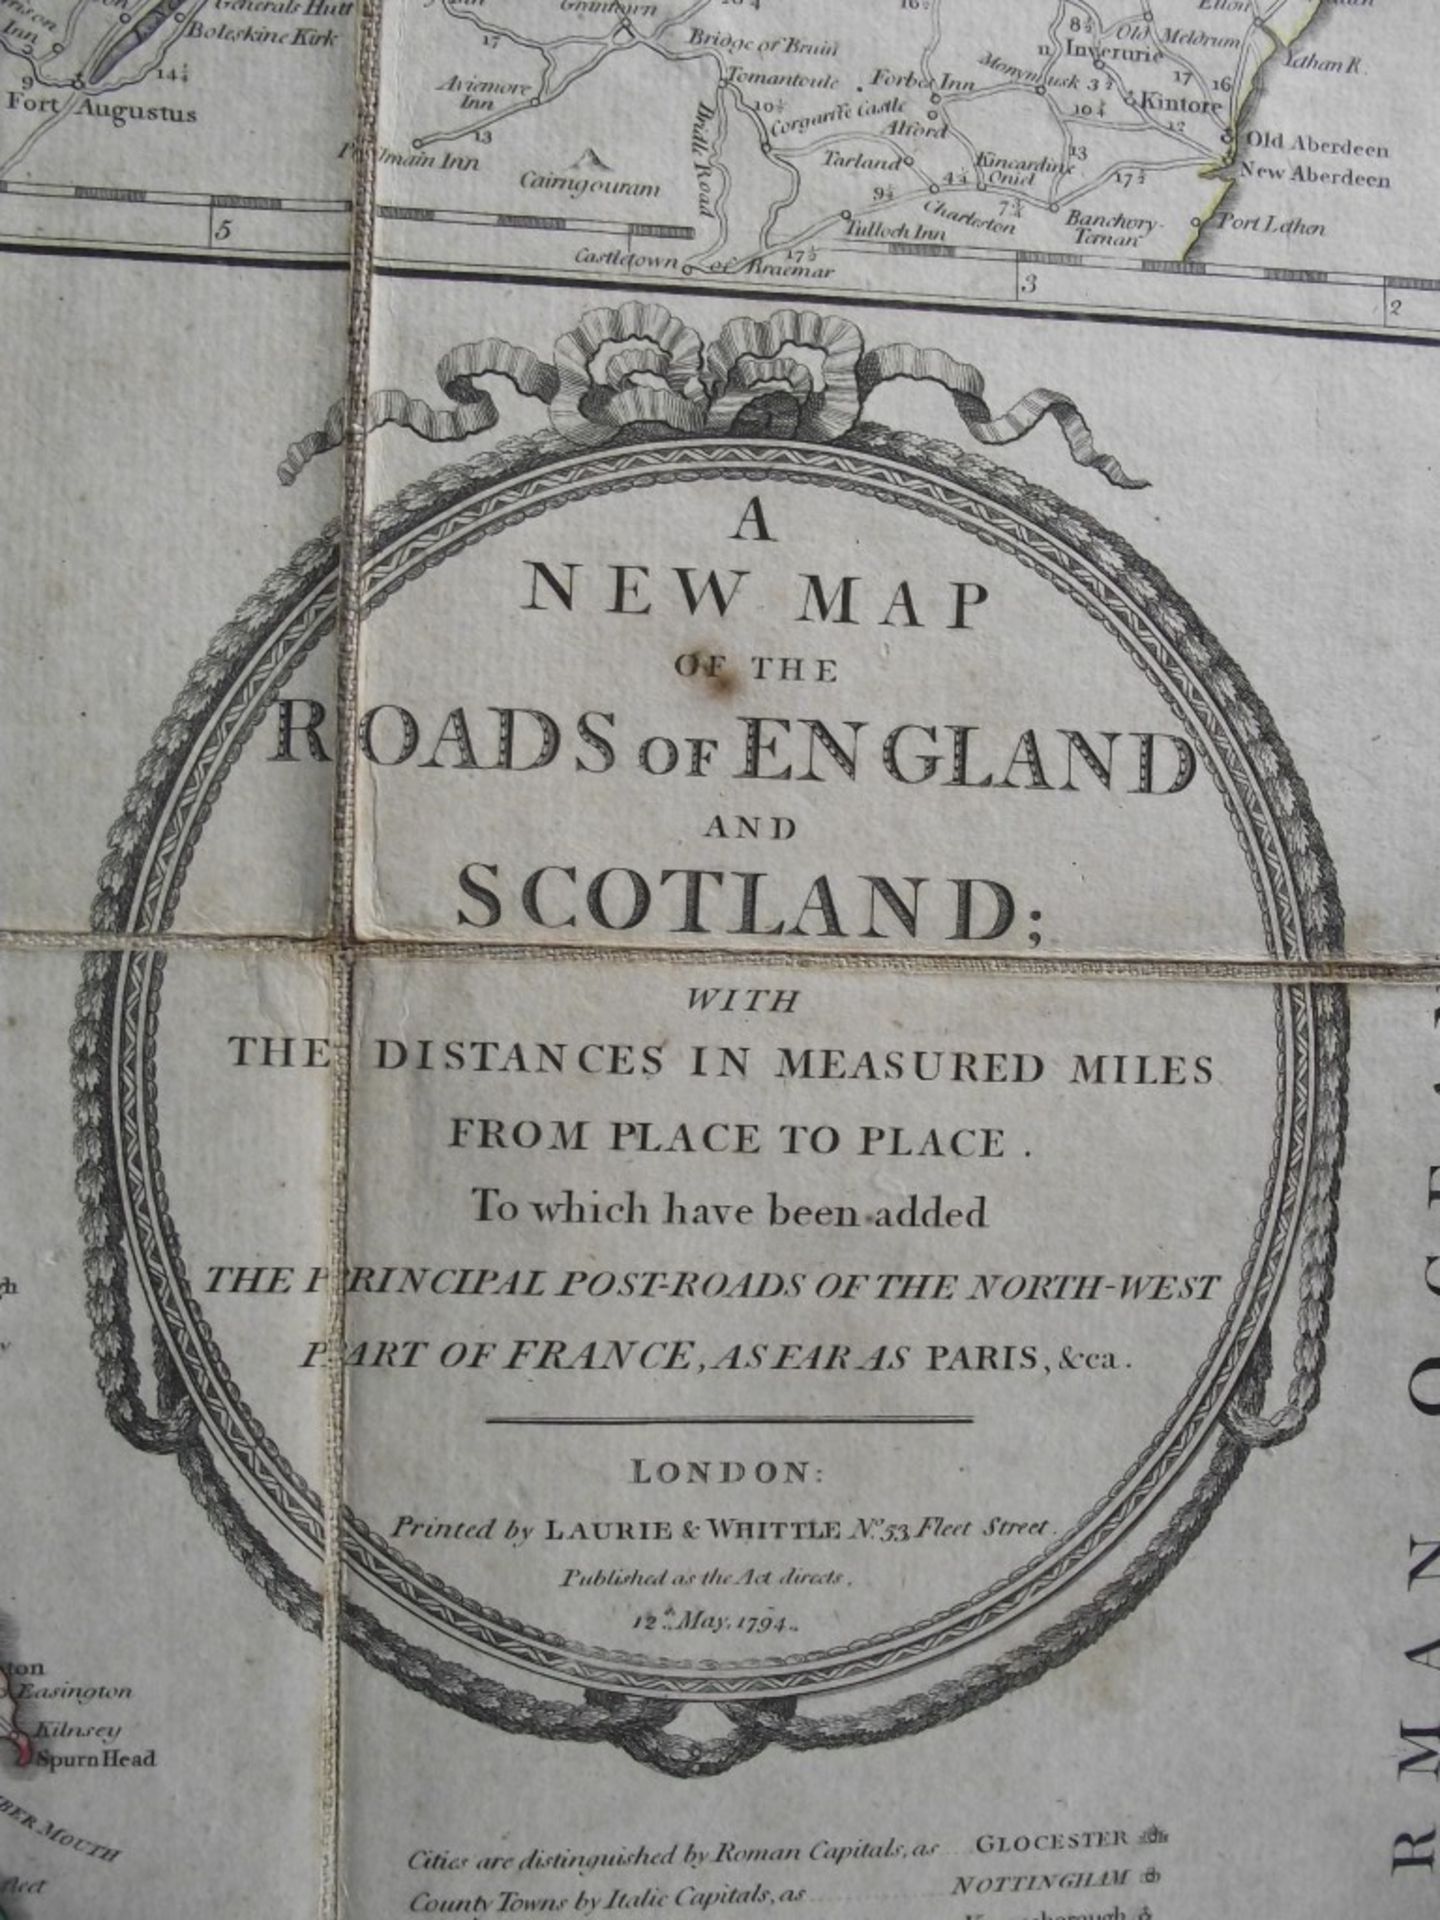 A New Map of The Roads of England and Scotland - Laurie & Whittle - 1794 - With Original Case - Image 2 of 32